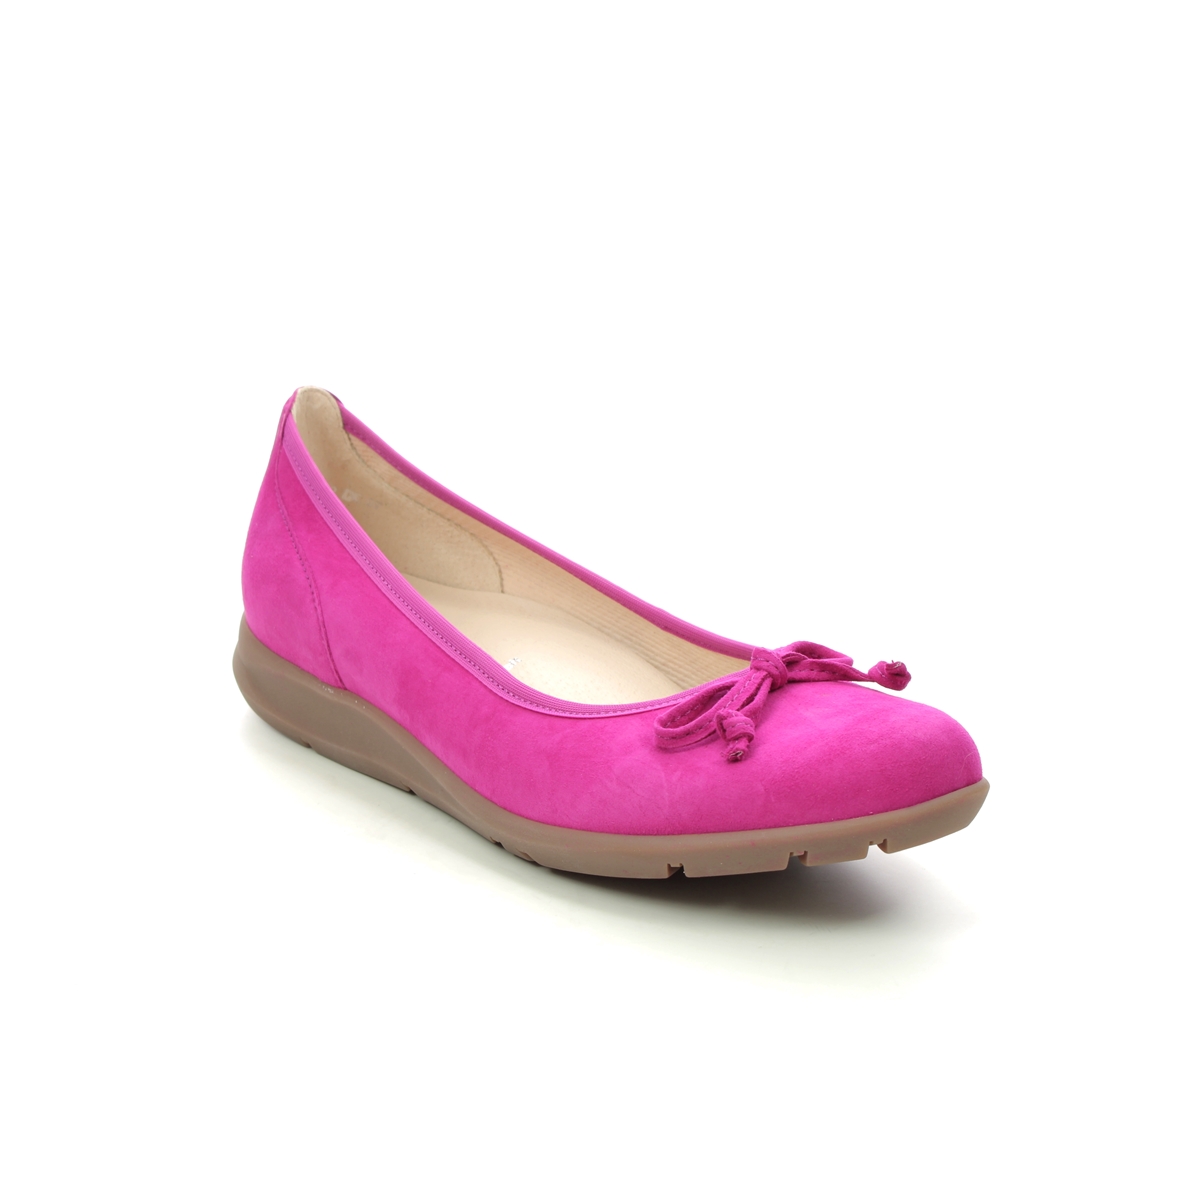 Gabor Salcombe Fuchsia Suede Womens pumps 24.171.10 in a Plain Leather in Size 5